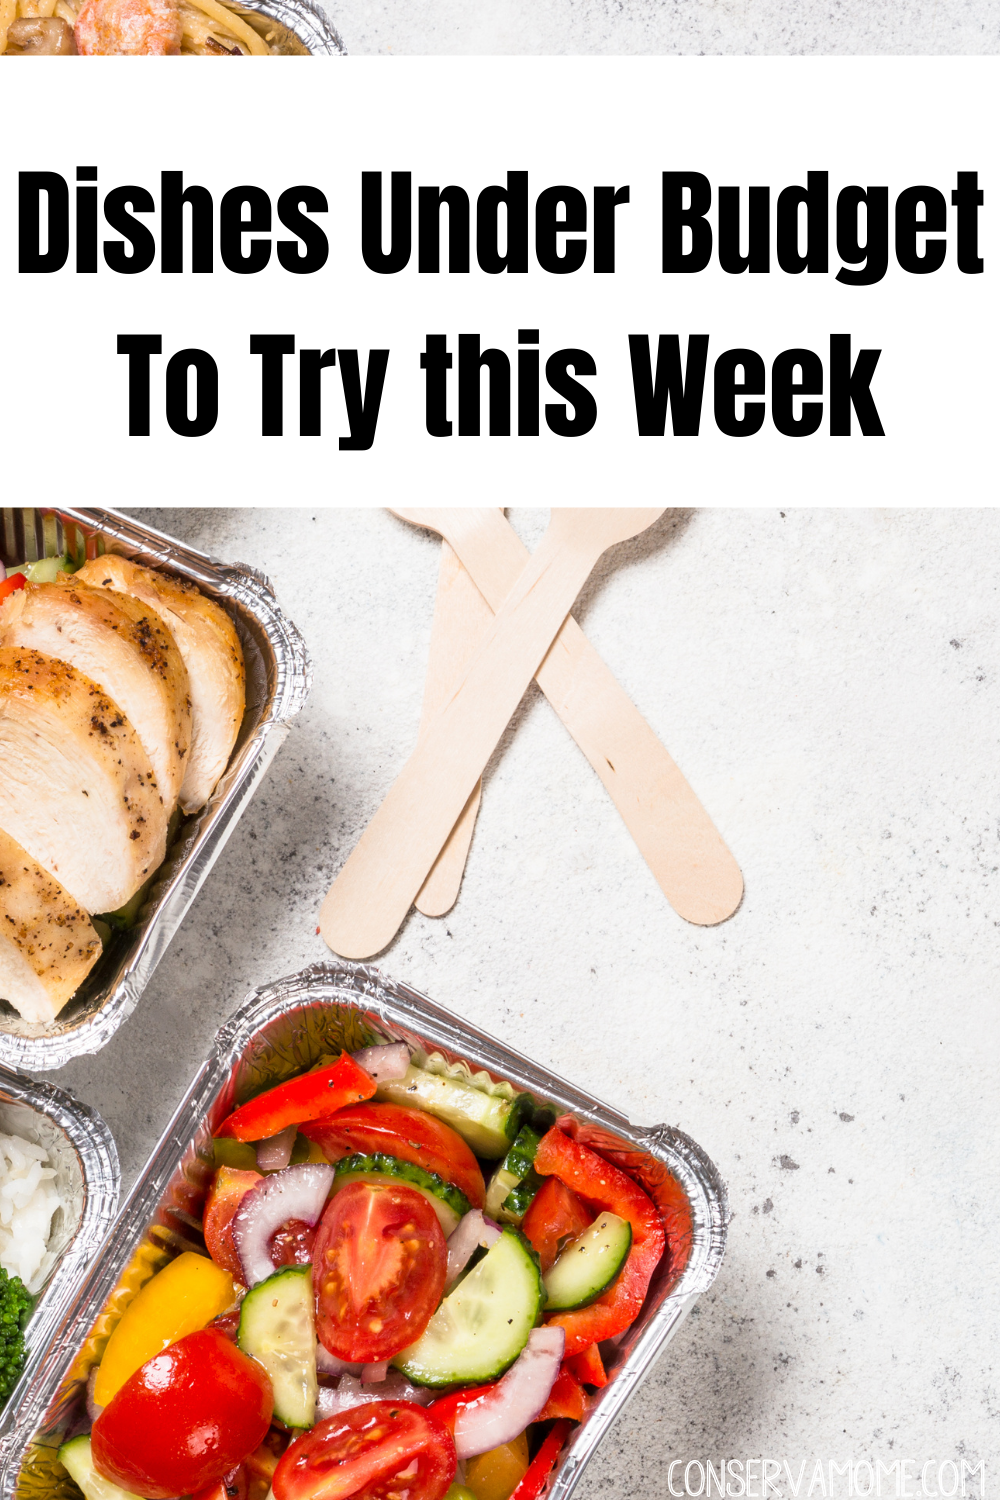 Dishes under budget to try this week